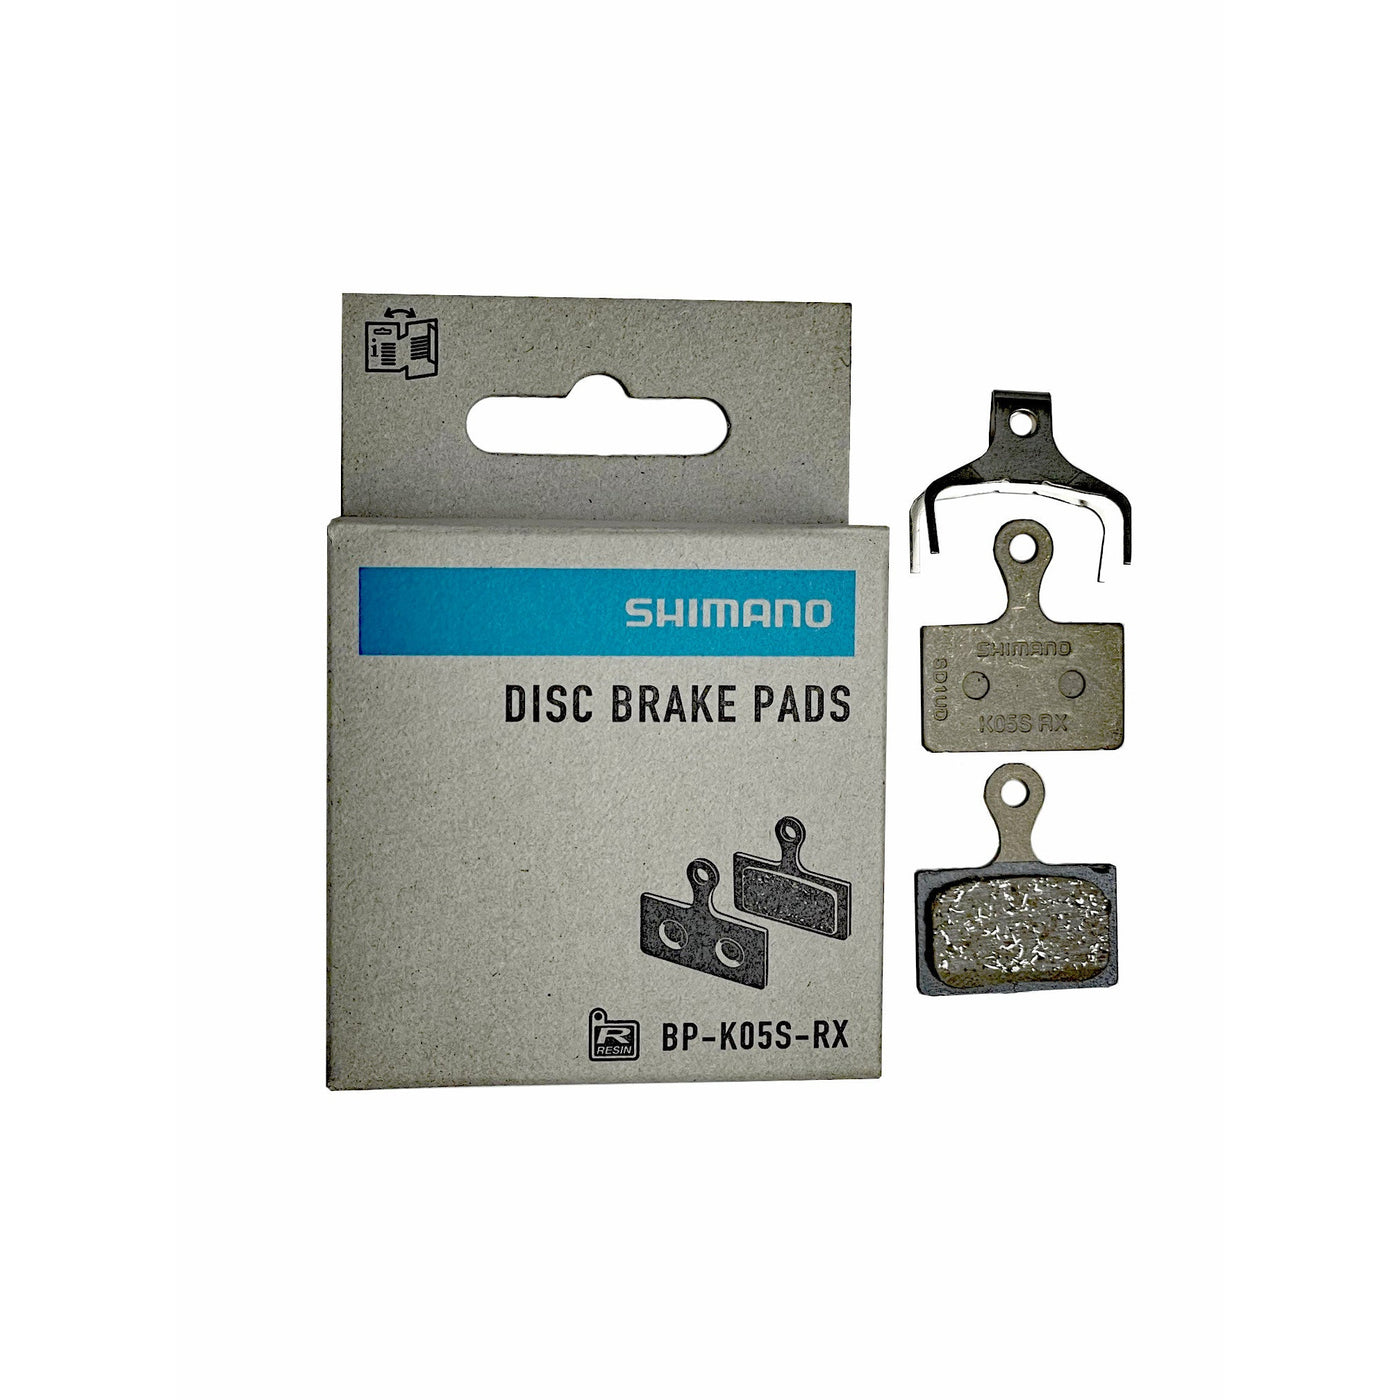 Shimano K05S-RX Disc Brake Pads Resin M9100 M9110 M8110 R9270 R8170 R9170 R8070 R7070 4770 RS805 RS505 RS405 RS305 U5000 RX810 RX400